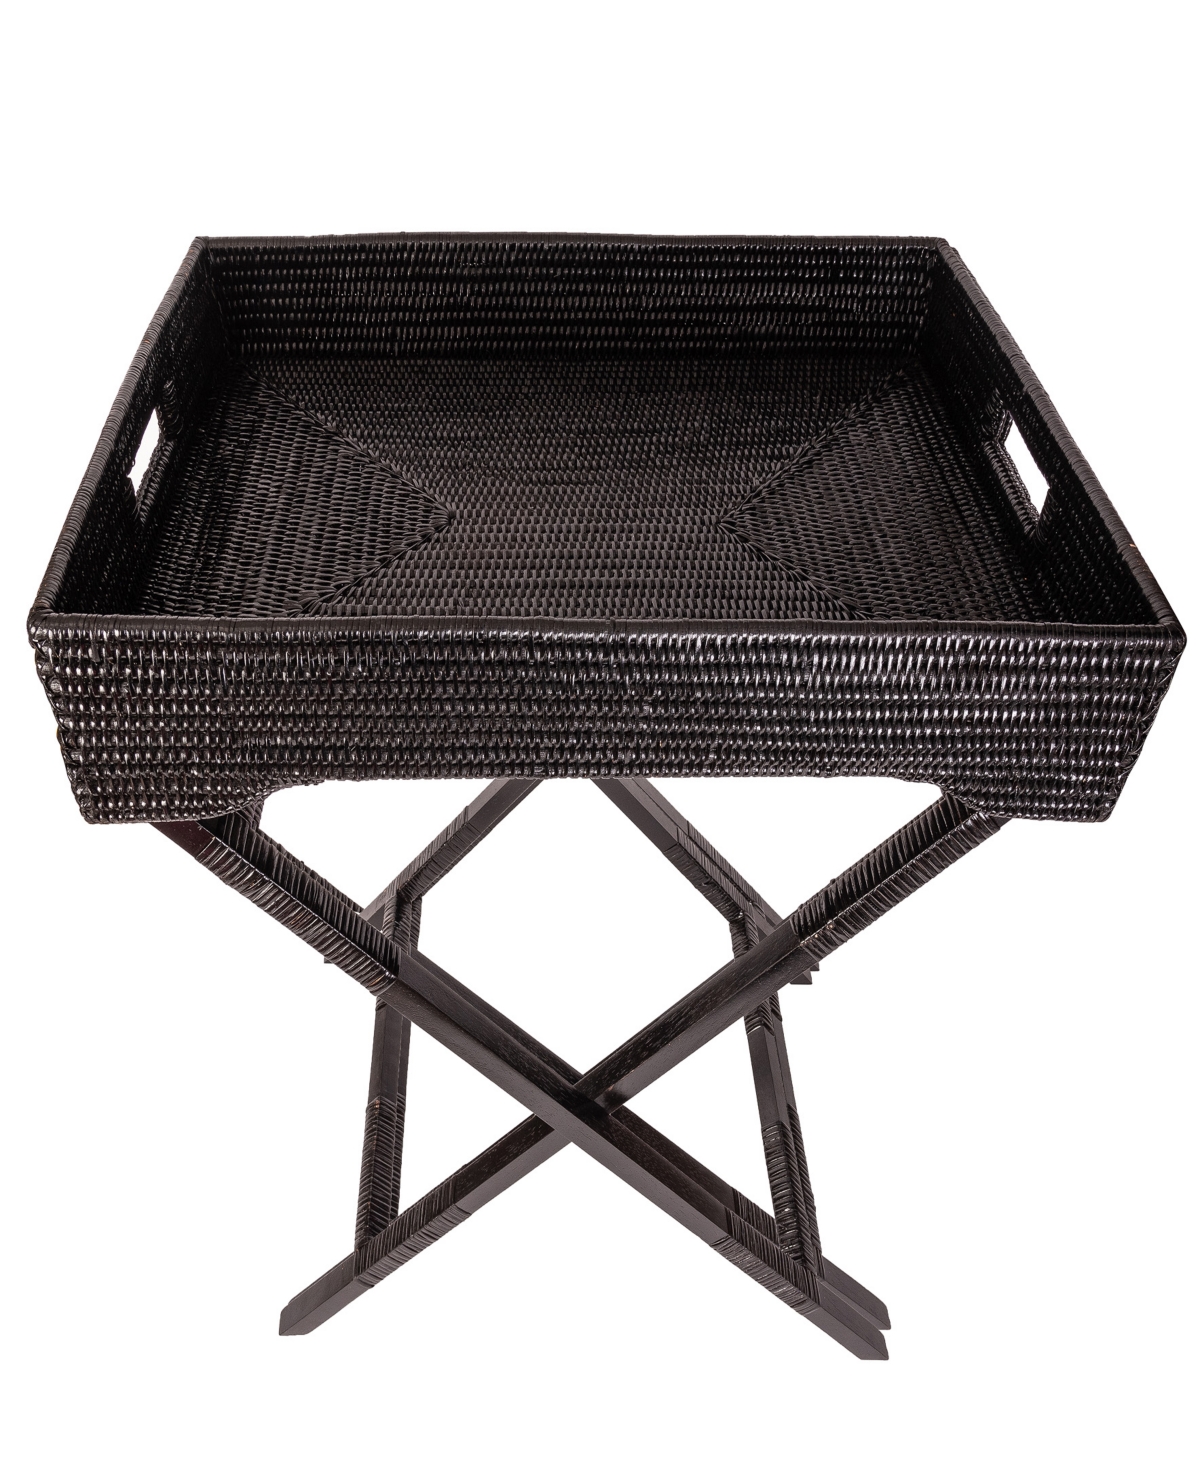 Artifacts Trading Company Rattan Butler Tray/table In Tudor Black